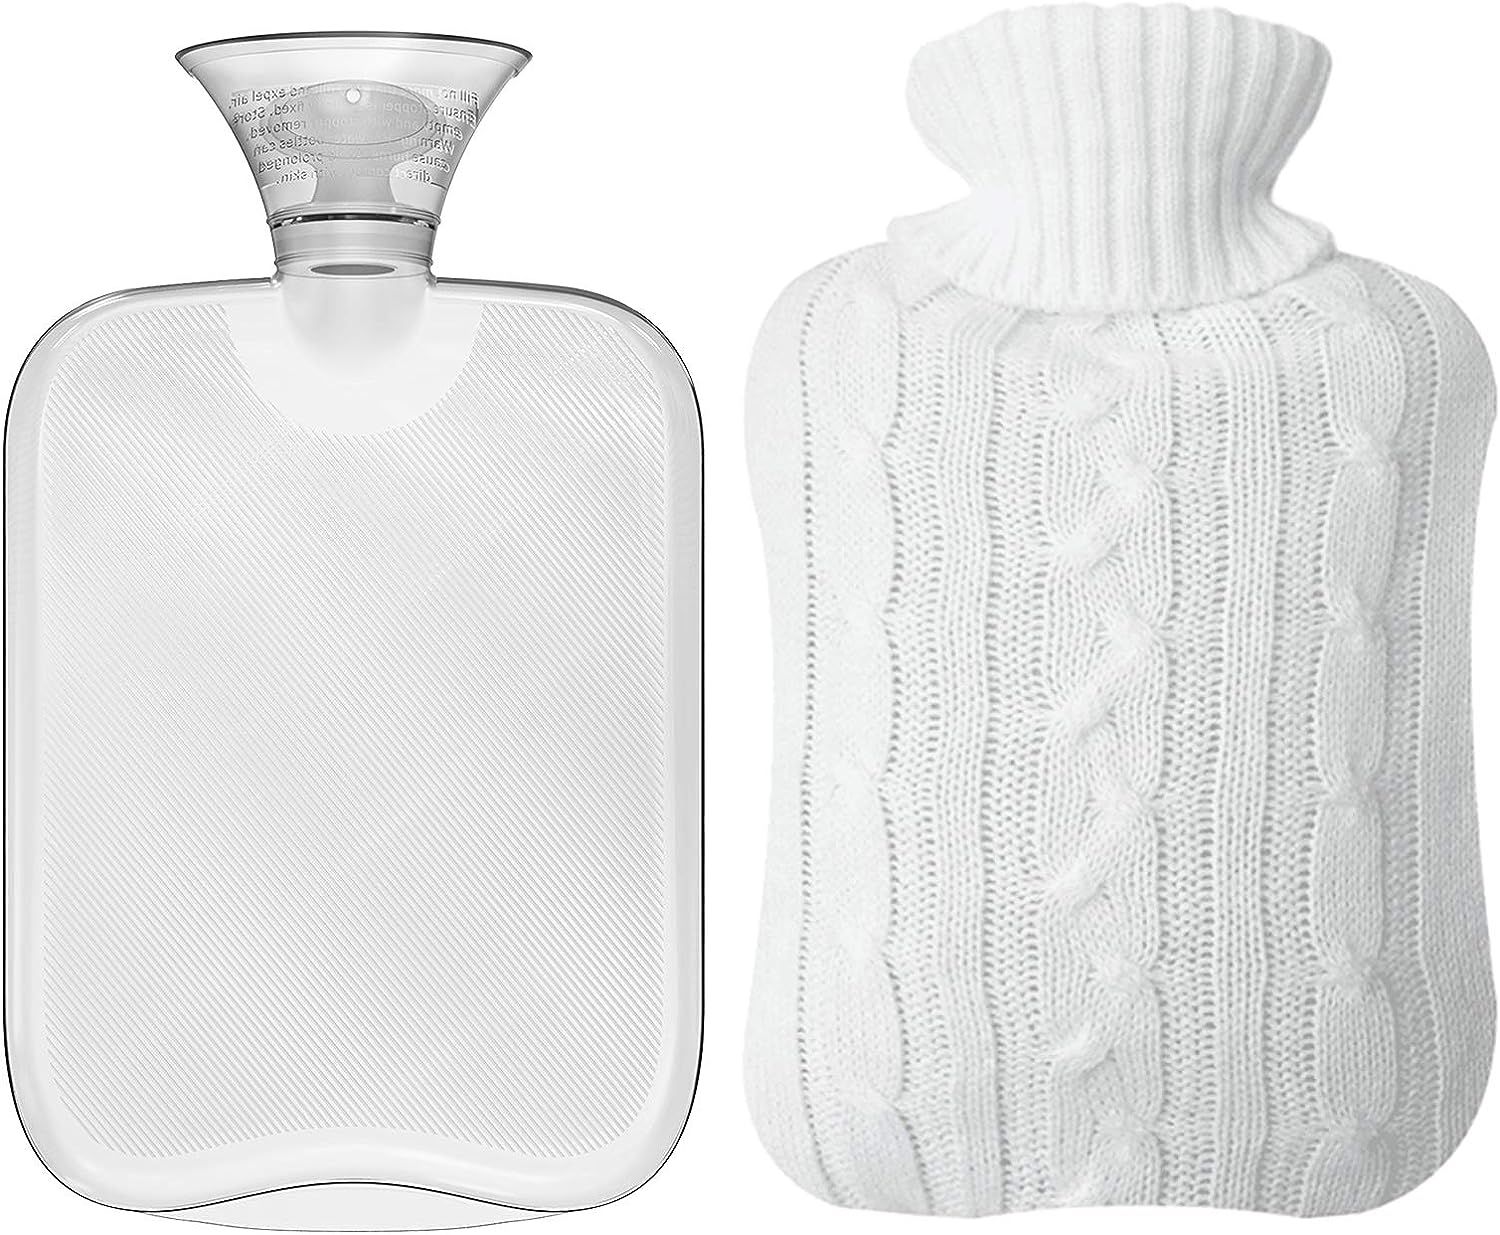 Attmu Classic Rubber Transparent Hot Water Bottle 2 Liter with Knit Cover - White | Amazon (US)